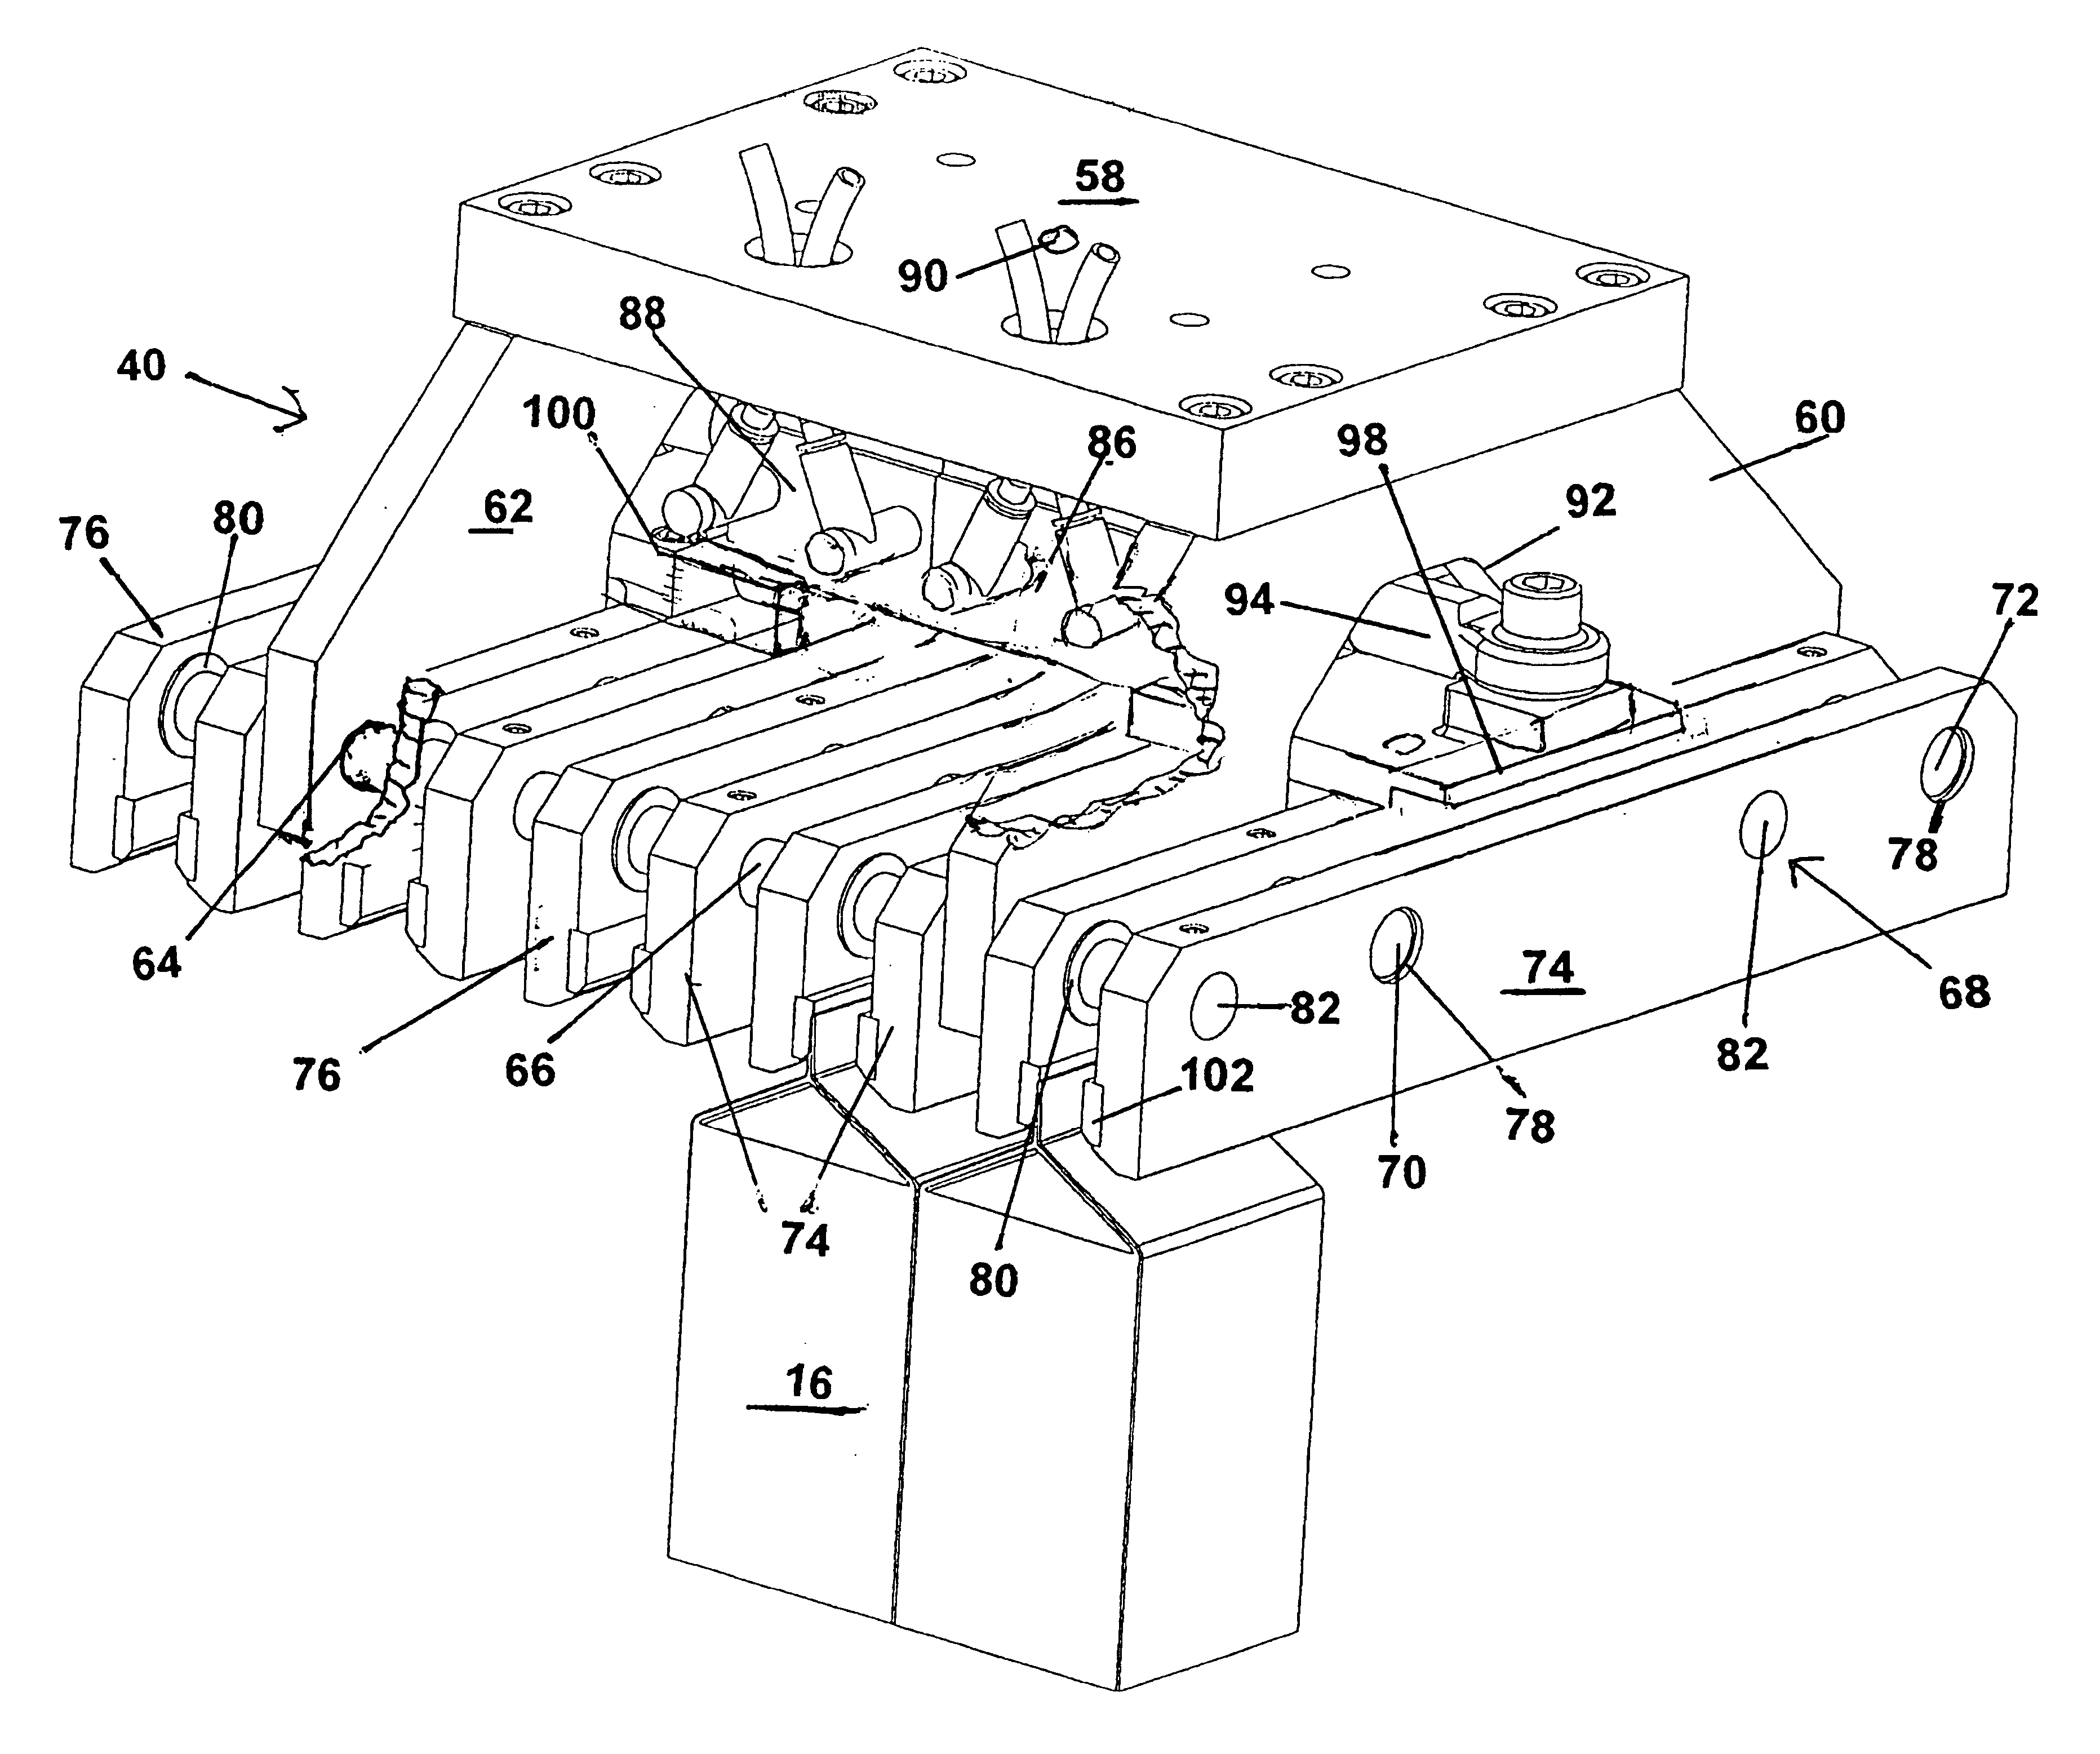 Packer apparatus, packing conveyor and method